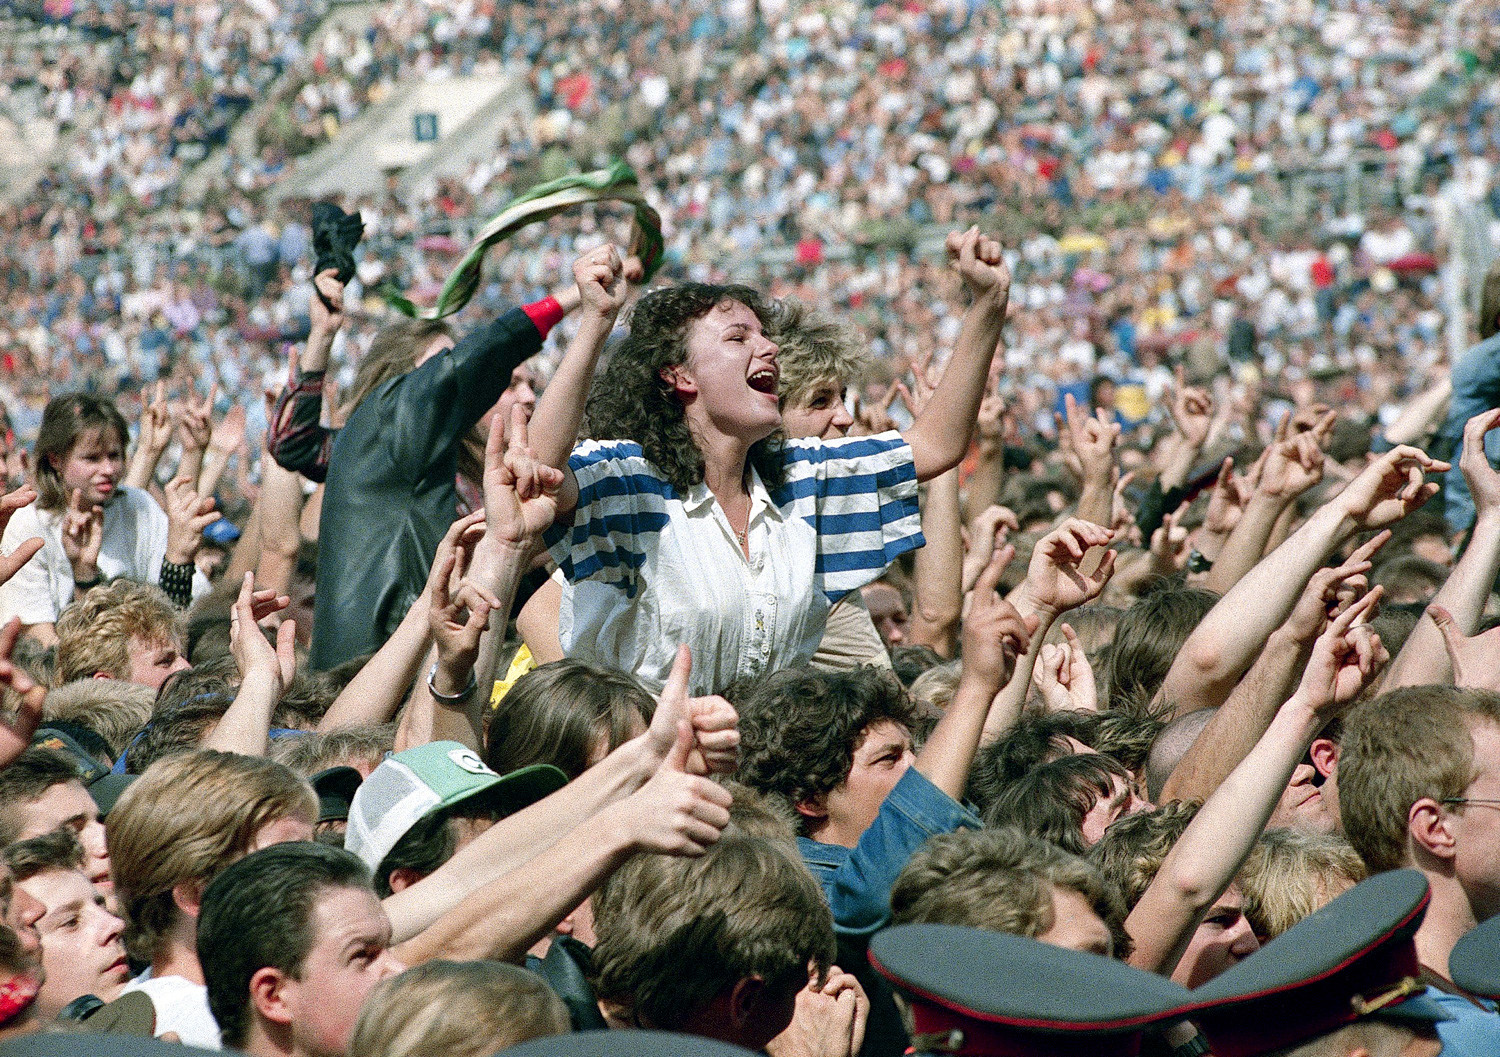  Western heavy metal rock bands including Bon Jovi, Motley Crue, Scorpions and Cinderella were enthusiastically received by loving fans in Moscow on Saturday, August 12, 1989 at The Moscow Music Peace Festival 